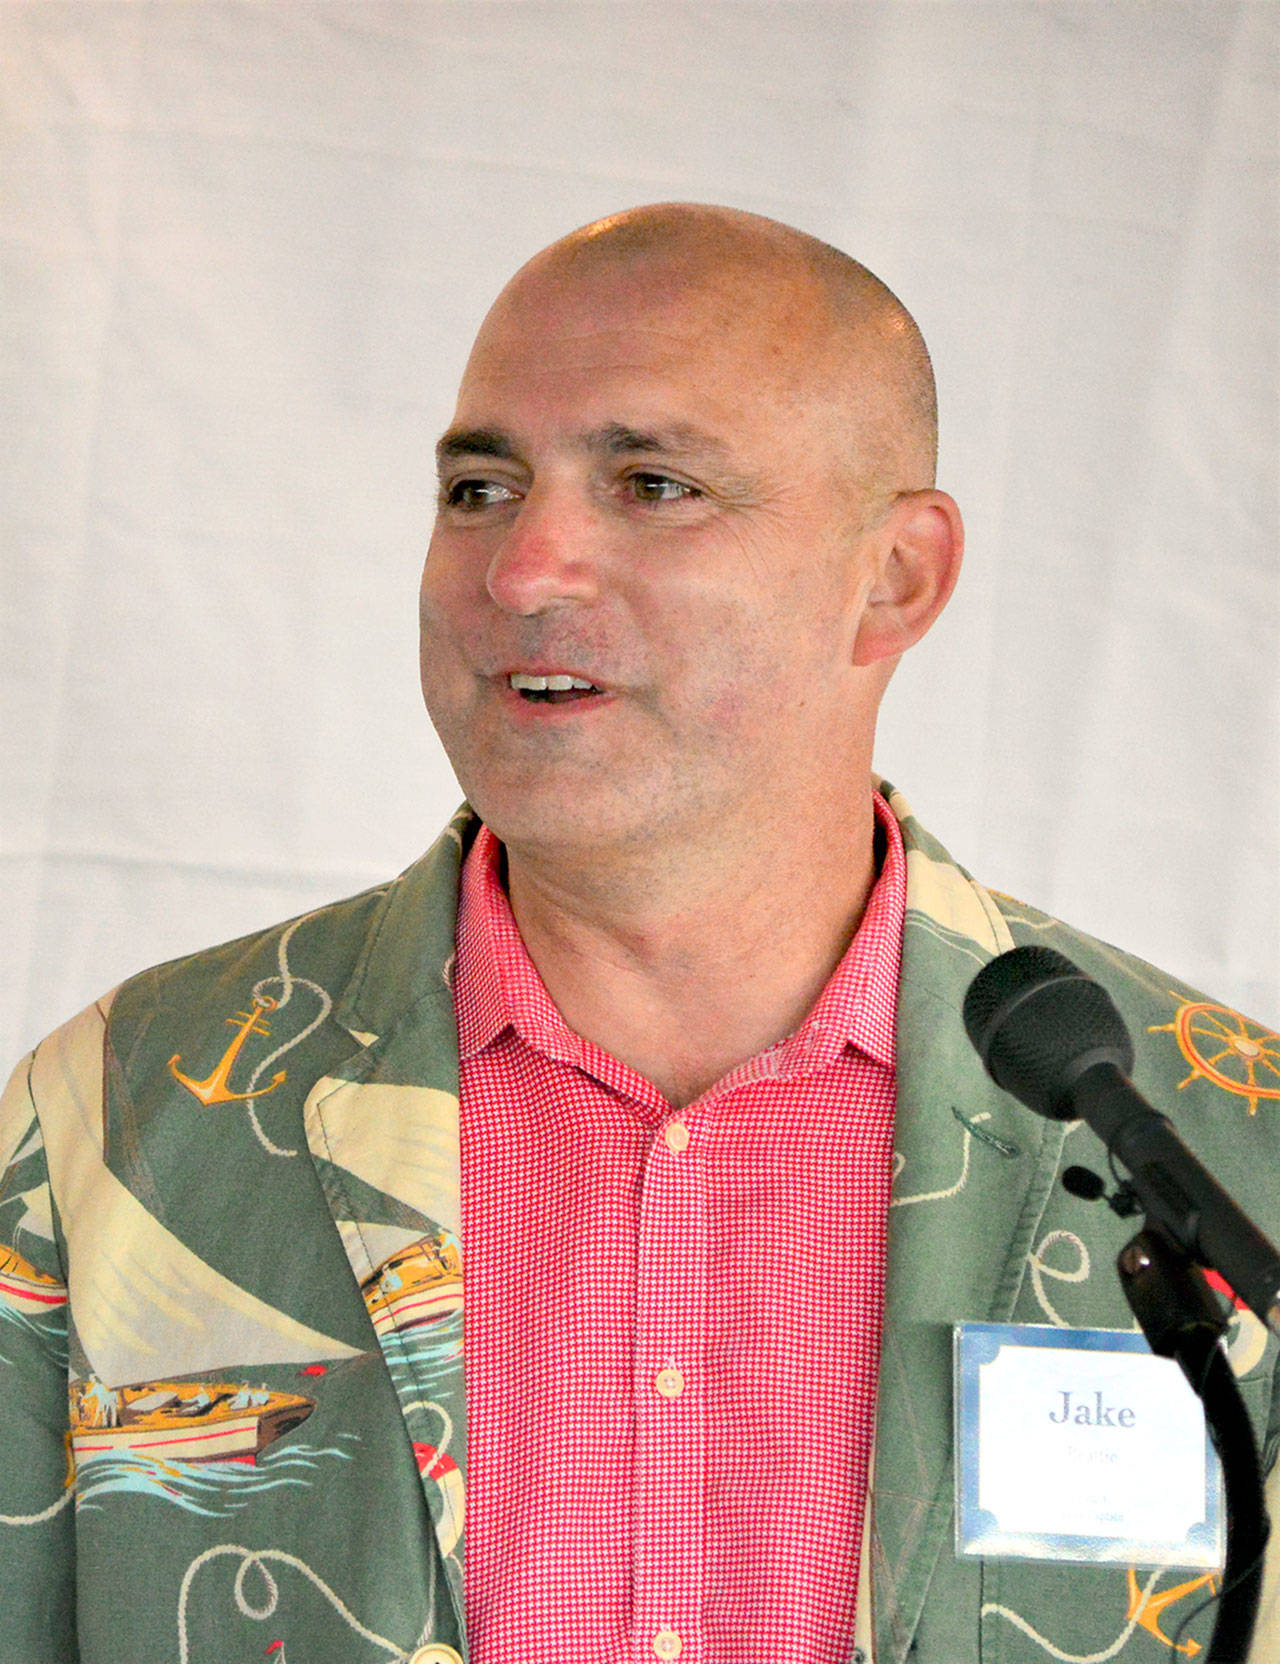 Northwest Maritime Center Executive Director Jake Beattie, pictured at the Navigator Night Out fundraiser in July, announced Friday that the 45th annual Wooden Boat Festival will be canceled. (Diane Urbani de la Paz/Peninsula Daily News)